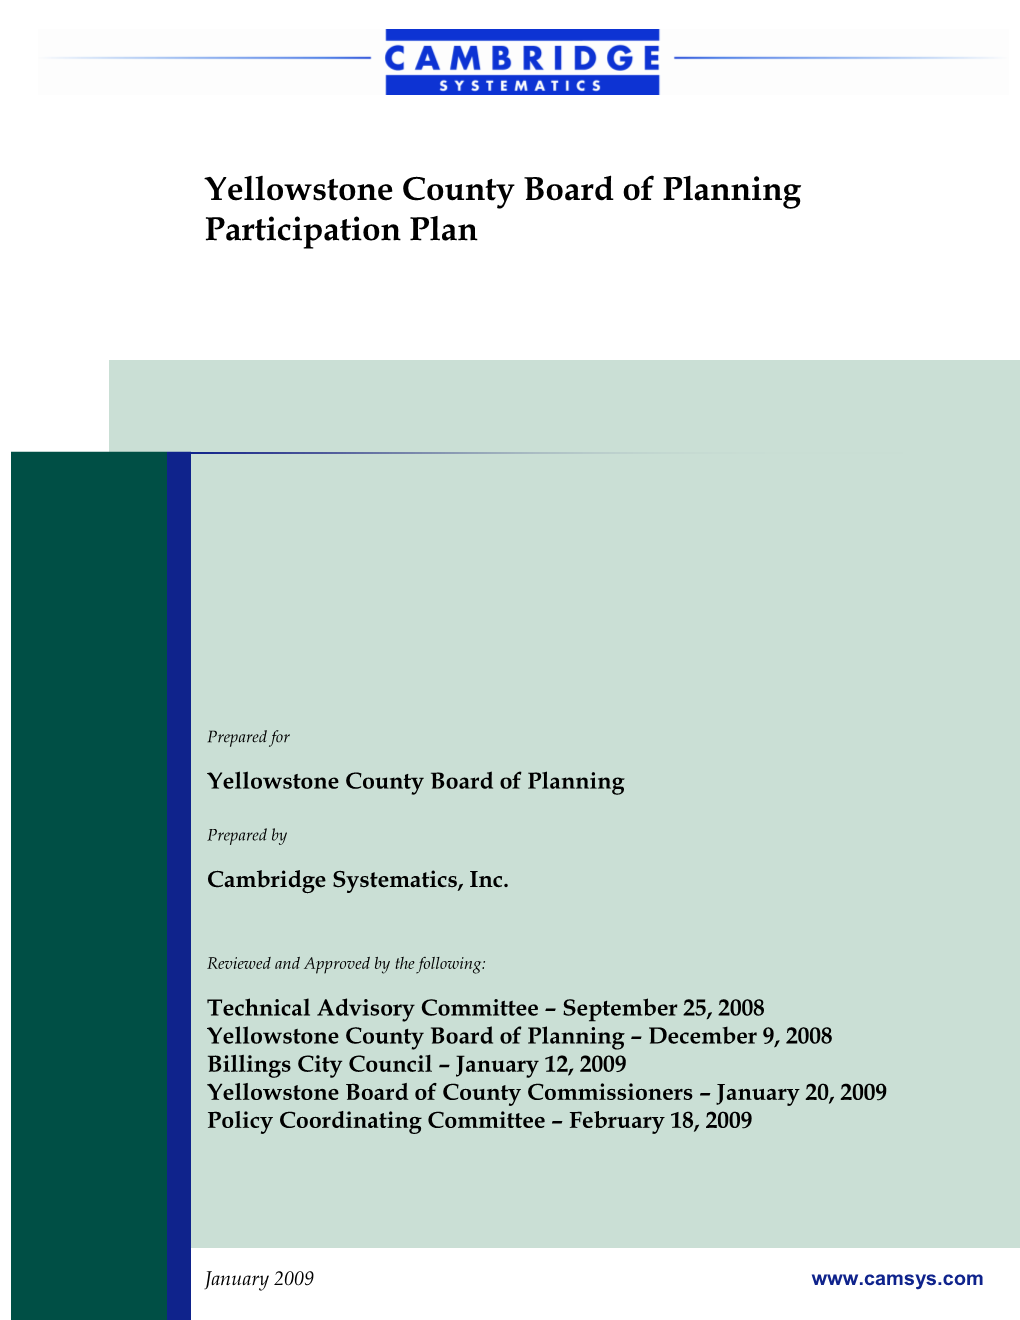 Yellowstone County Board of Planning Participation Plan